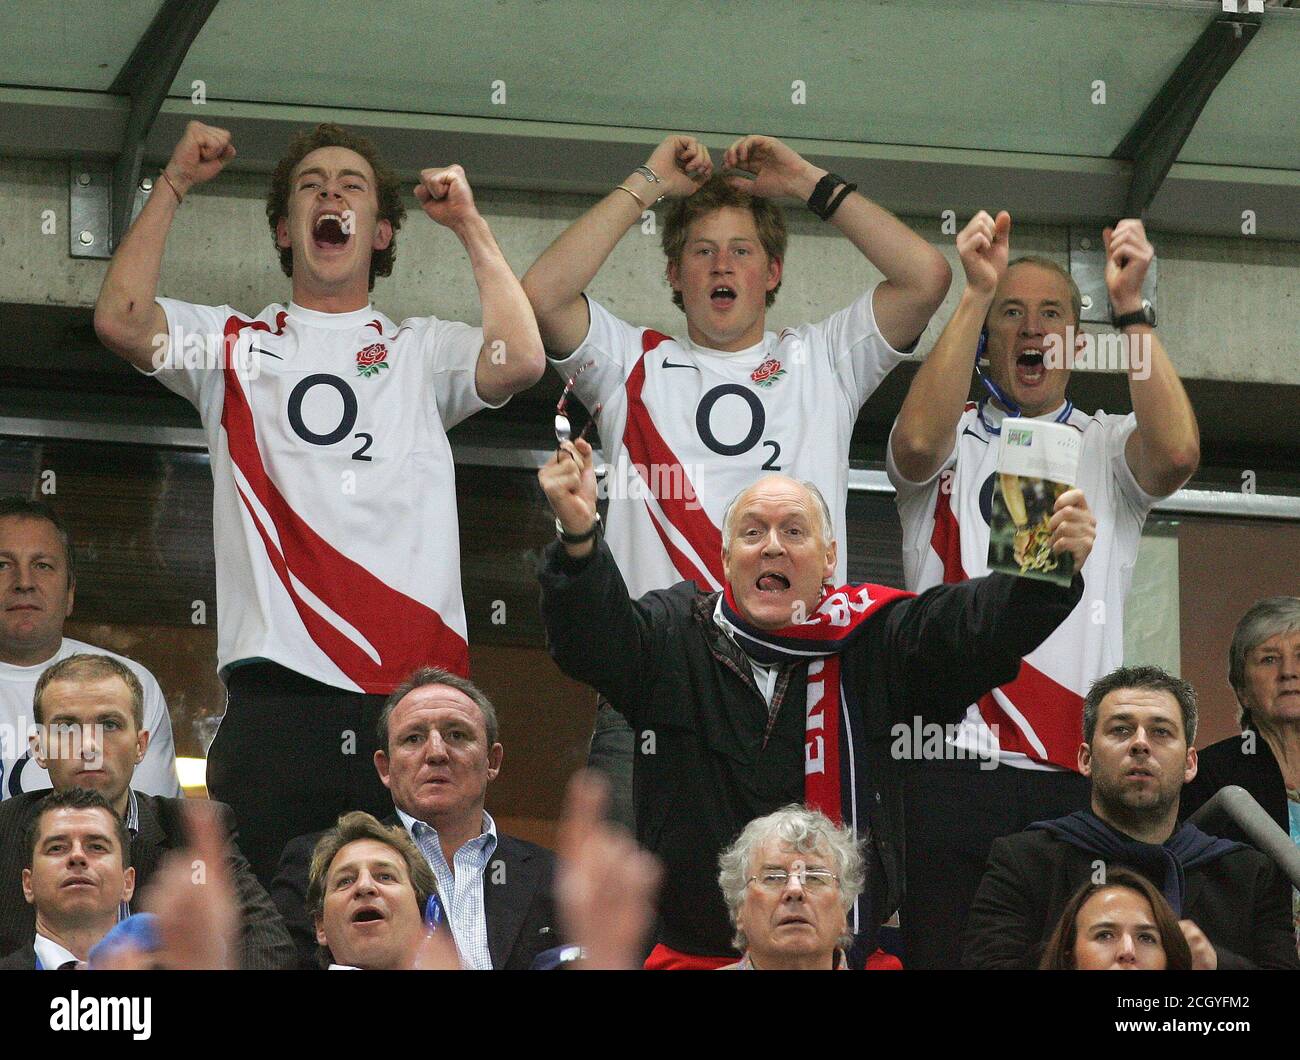 Prince Harry. Rugby World Cup Semi Final. France v England. Paris. 13 Oct 2007 PICTURE : MARK PAIN / ALAMY Stock Photo